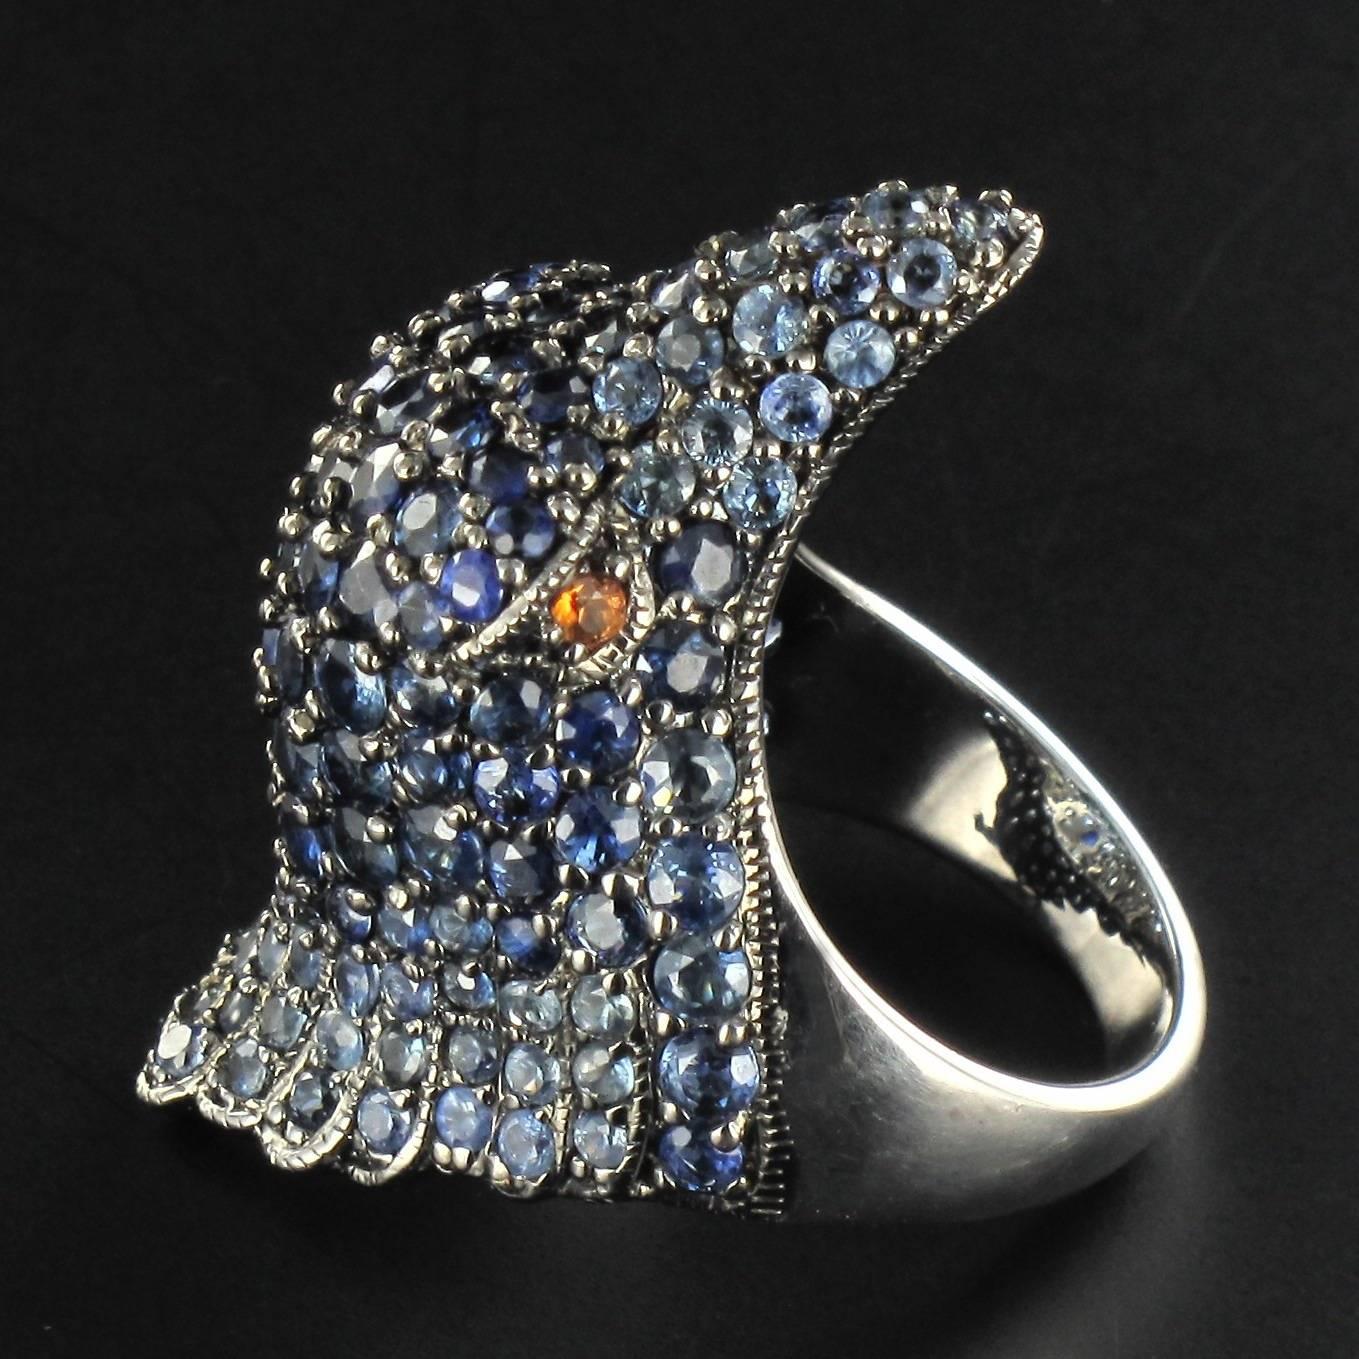 Sterling silver ring.
This surprising ‘animal’ style ring displays the head of an eagle entirely set with numerous sapphires that vary in colour from light blue to dark blue. The piercing eyes are formed of 2 orange sapphires. 
Total weight of